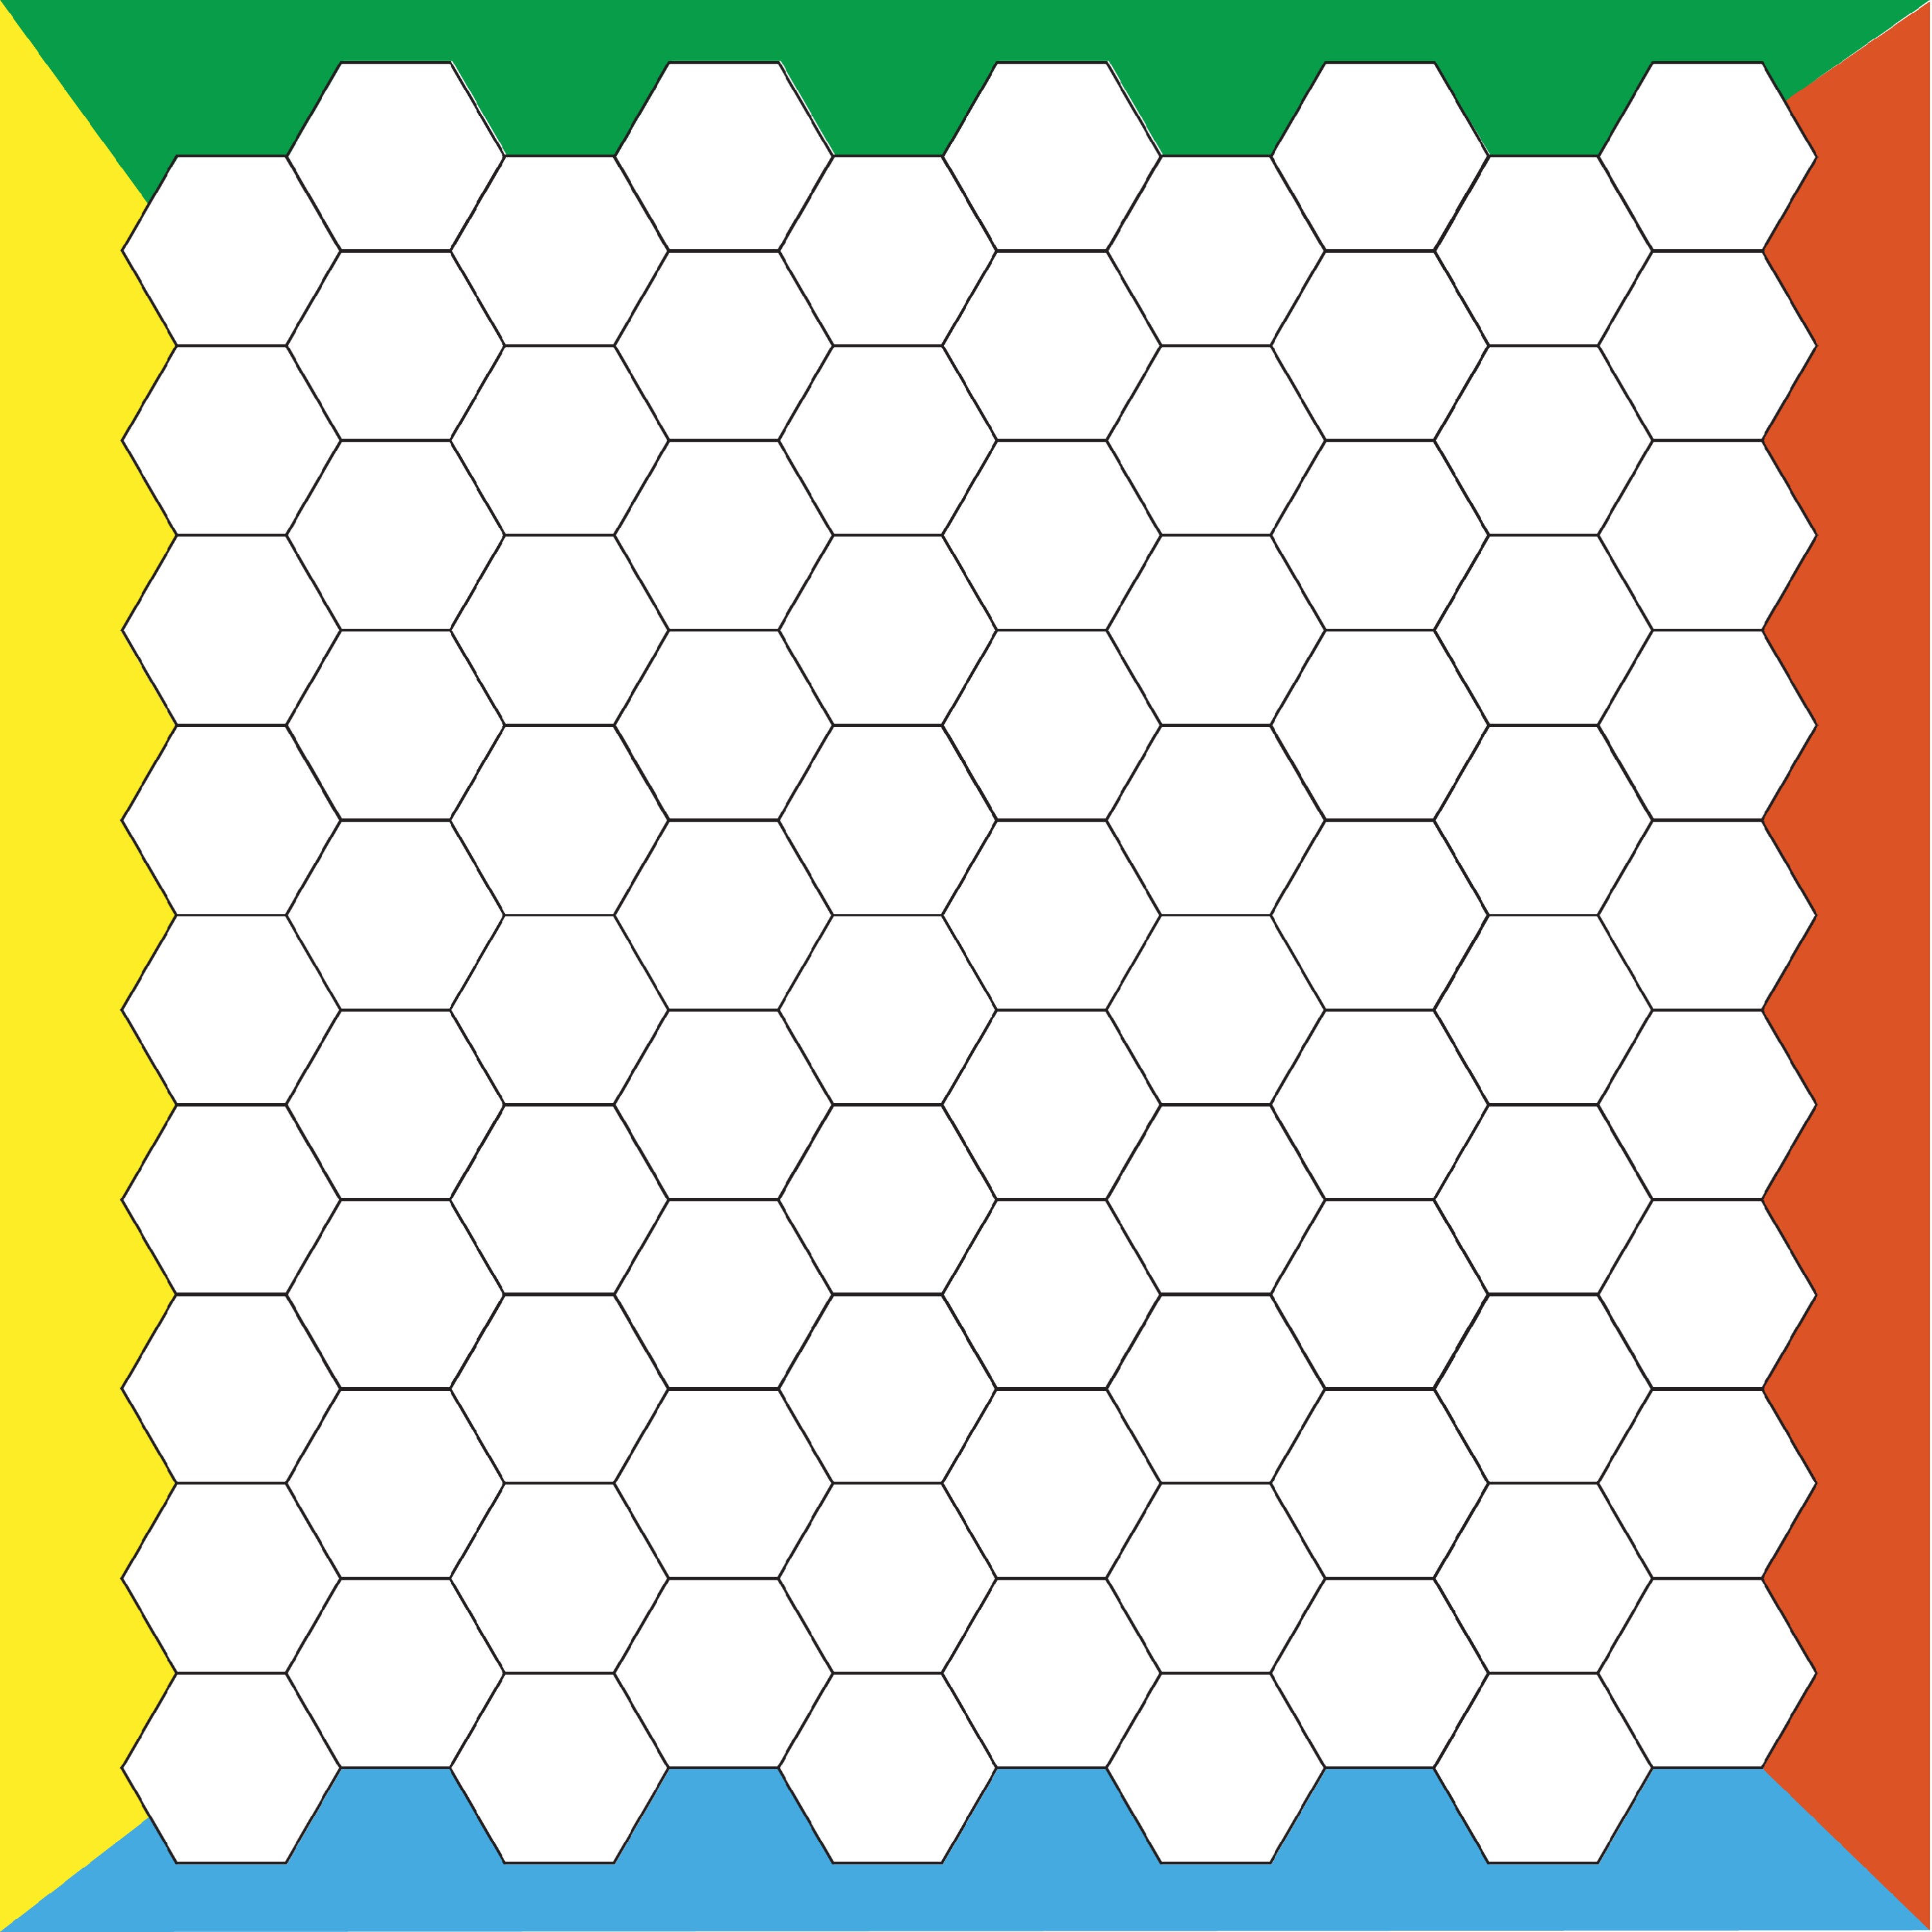 Transparent Hex Grid / It's foldable and about a2 in size, one hex is